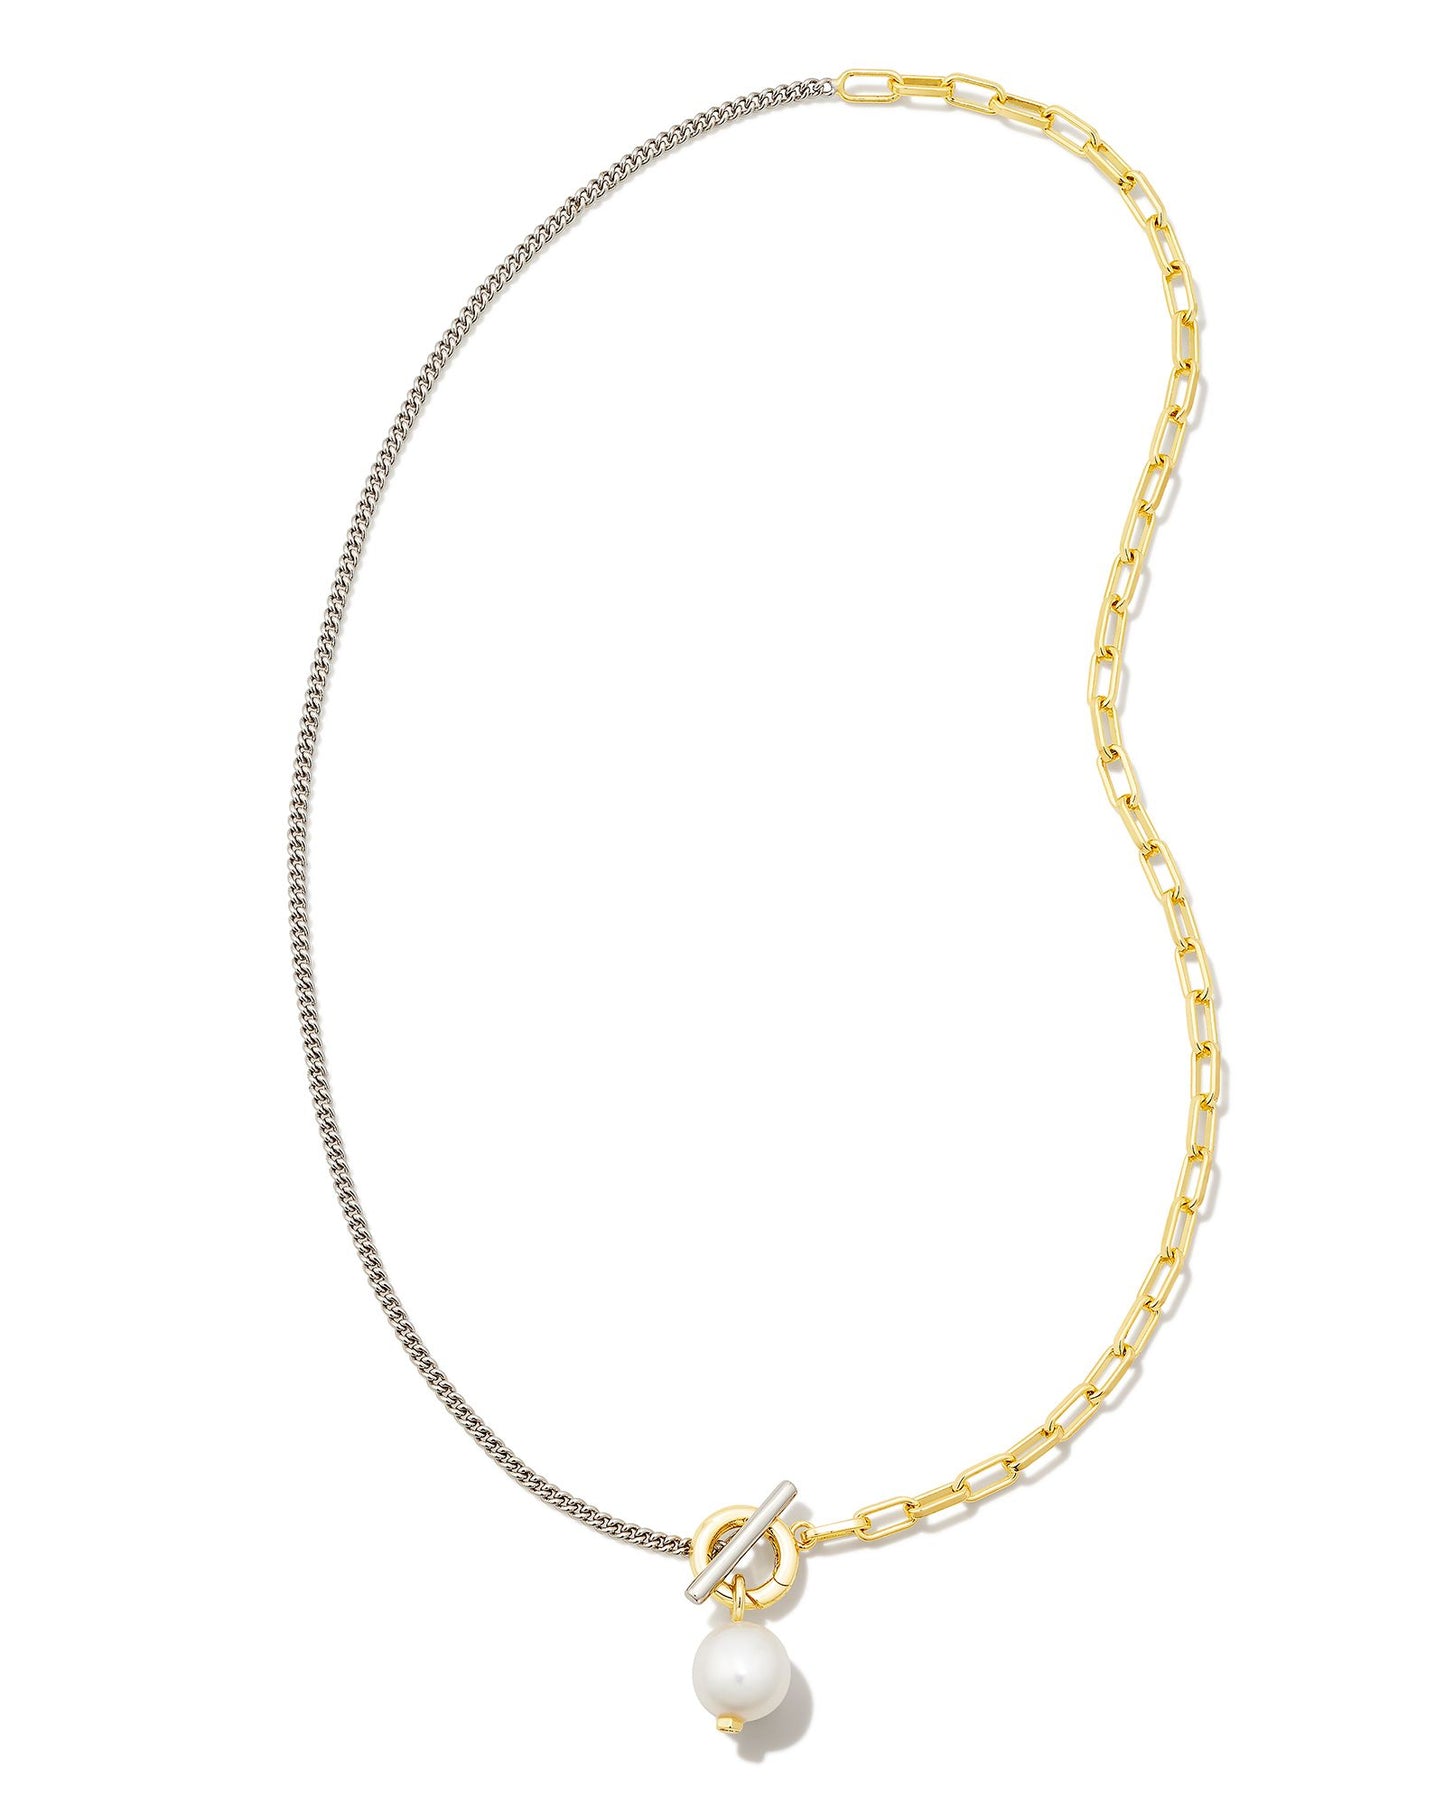 LEIGHTON PEARL CHAIN NECKLACE GOLD, SILVER WHITE PEARL